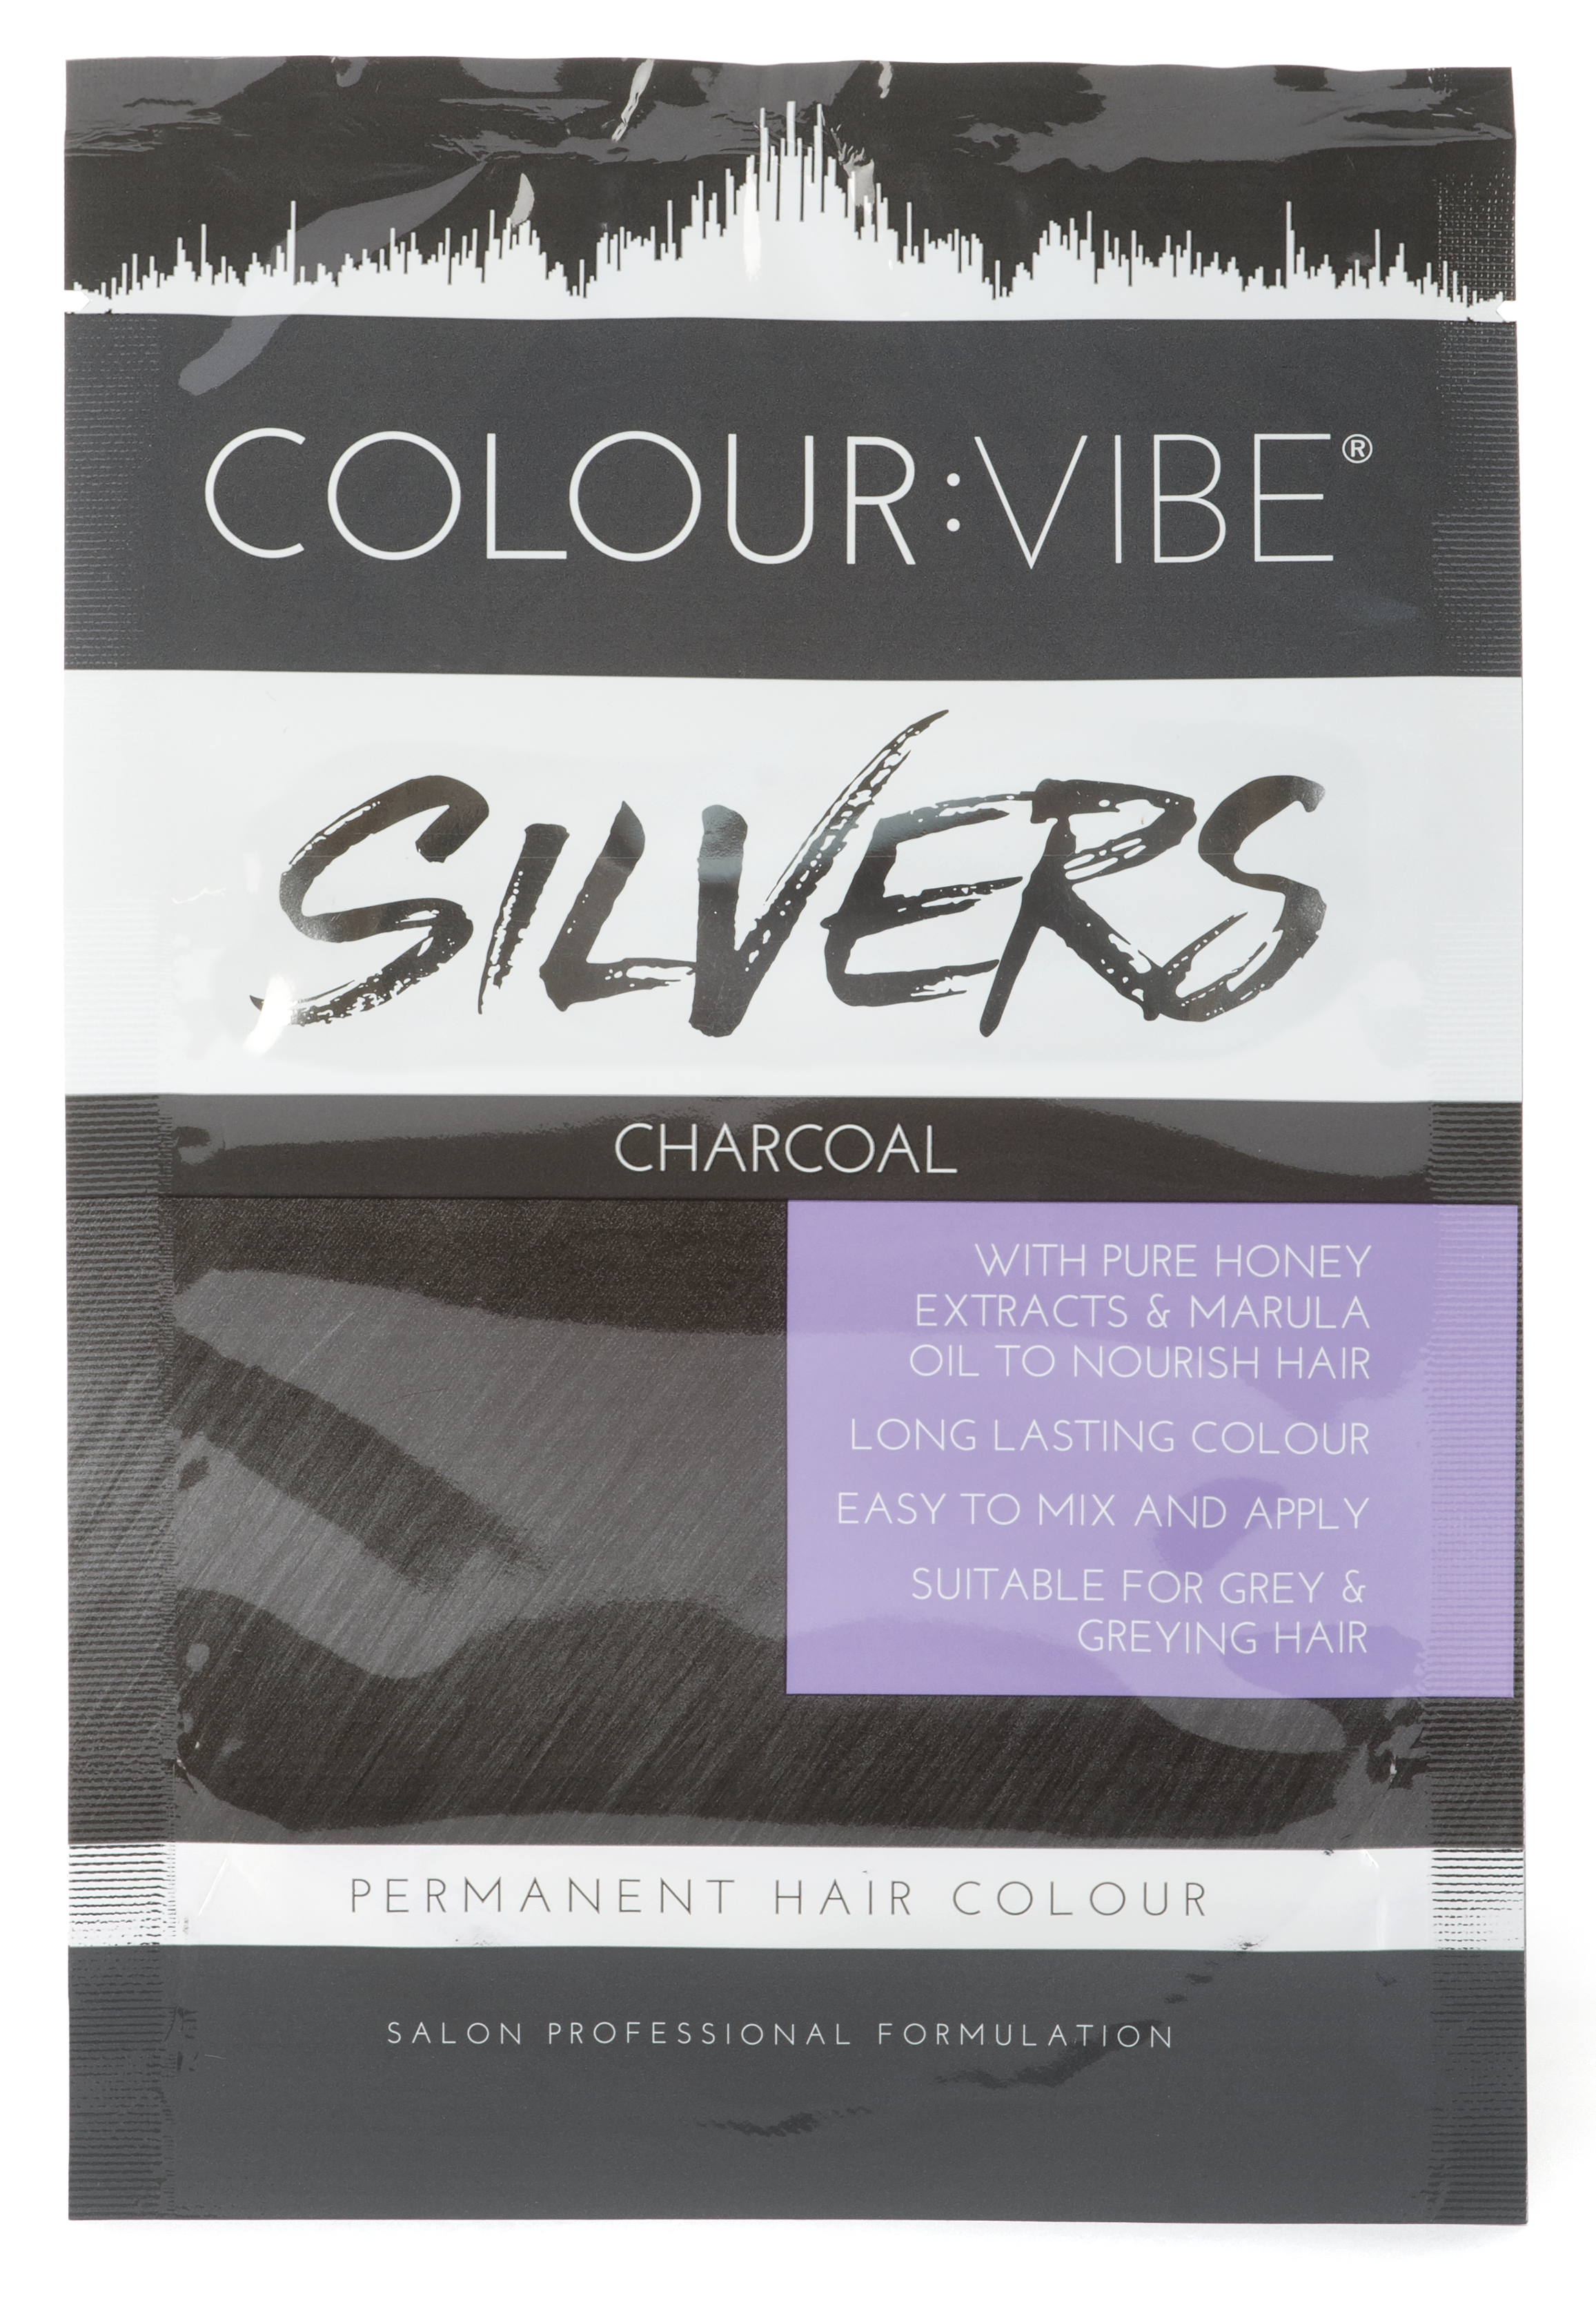 Colour:Vibe Silvers Permanent Charcoal